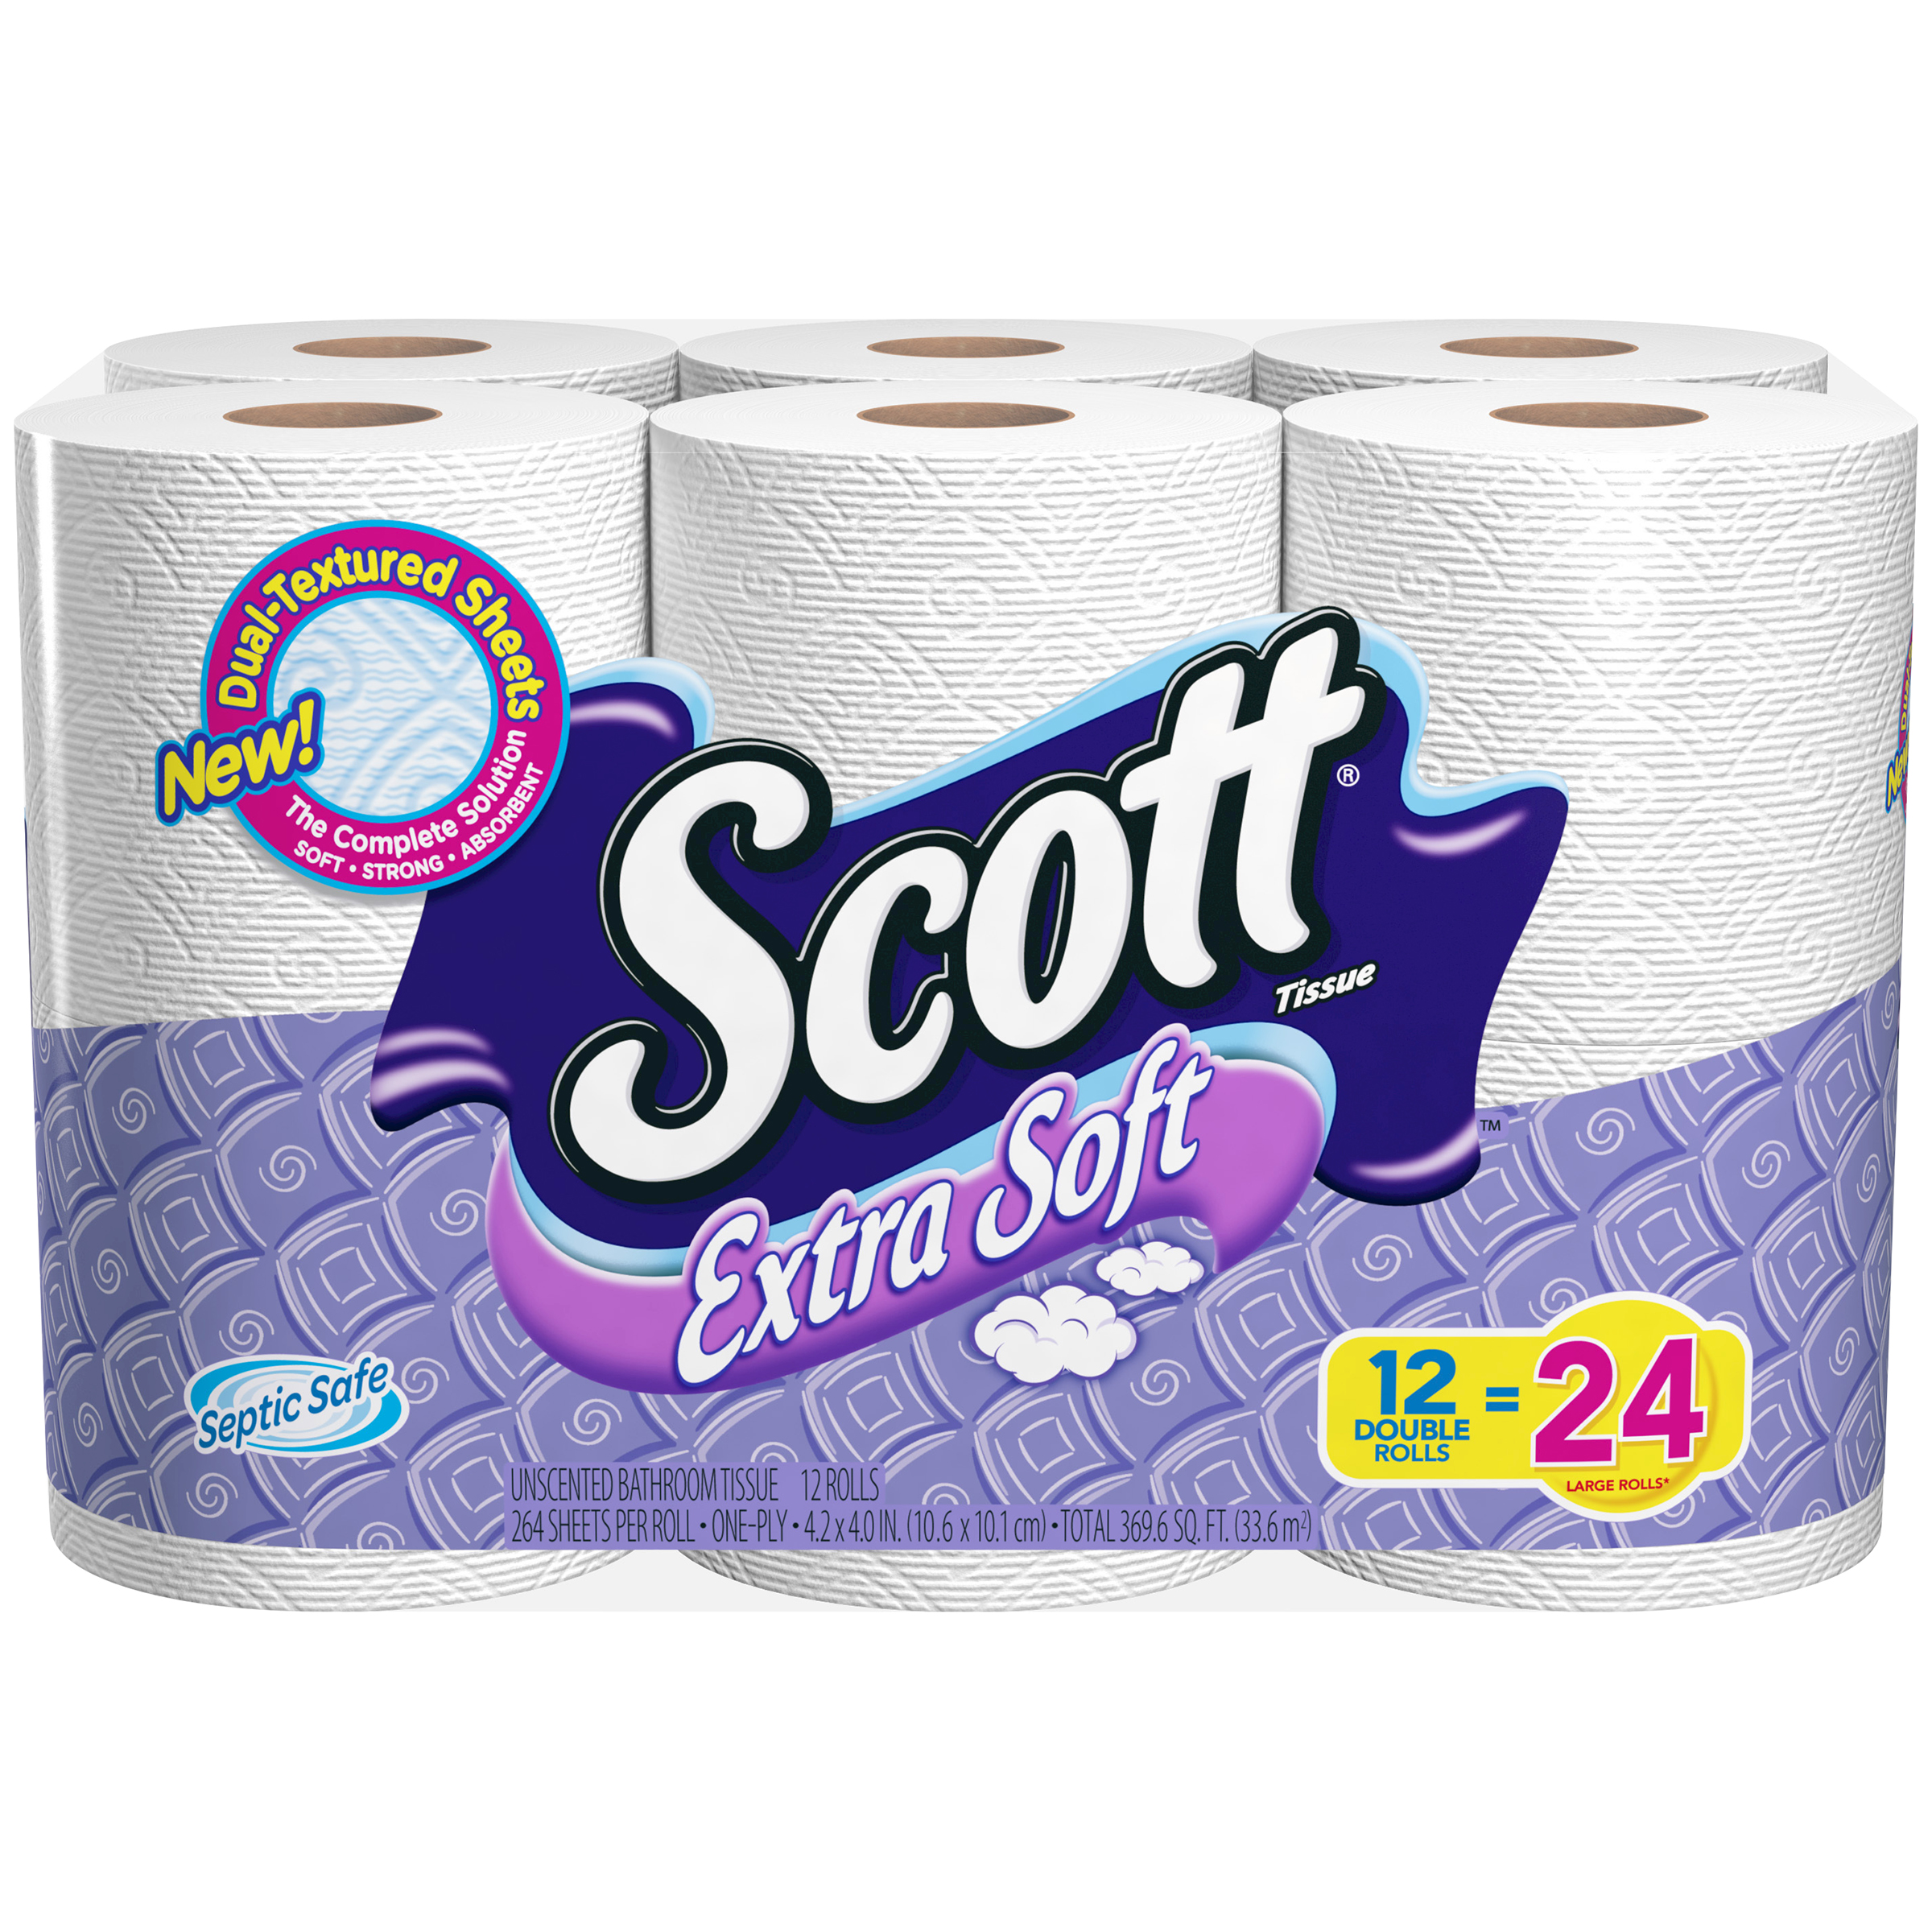 Scott Toilet Paper, Extra Soft, 12 Double Rolls - image 1 of 6